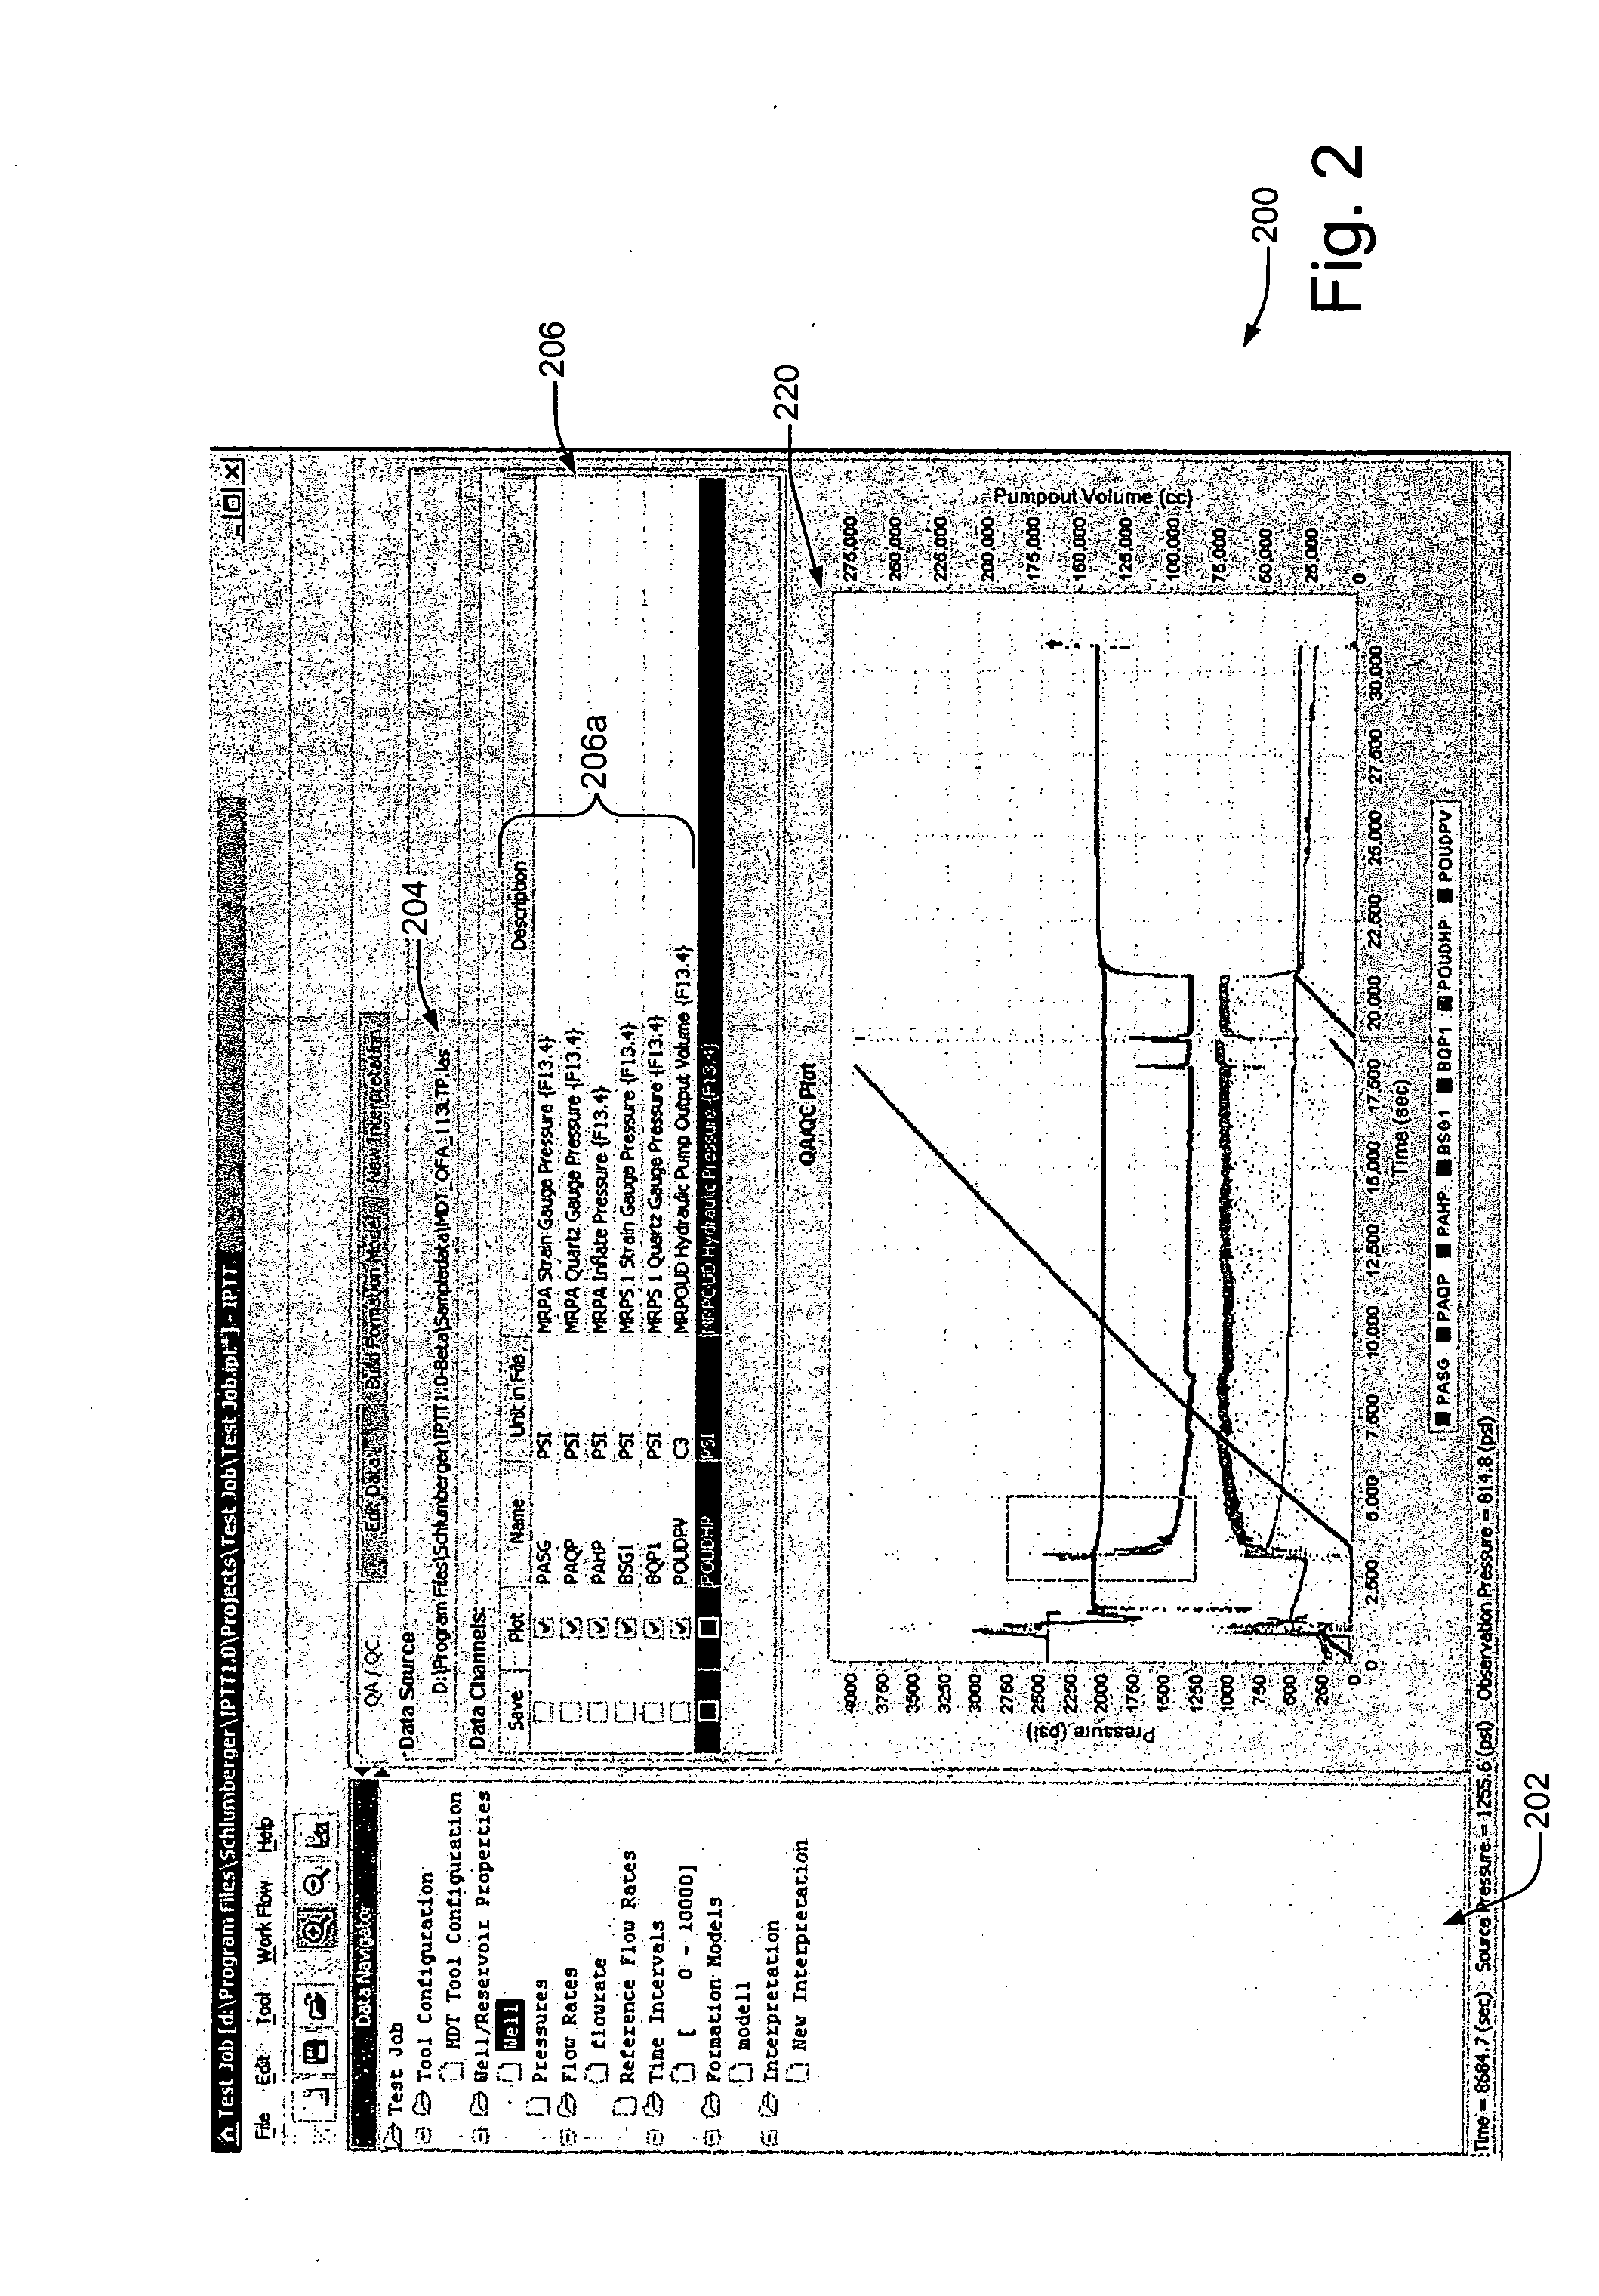 System and methods of characterizing a hydrocarbon reservoir